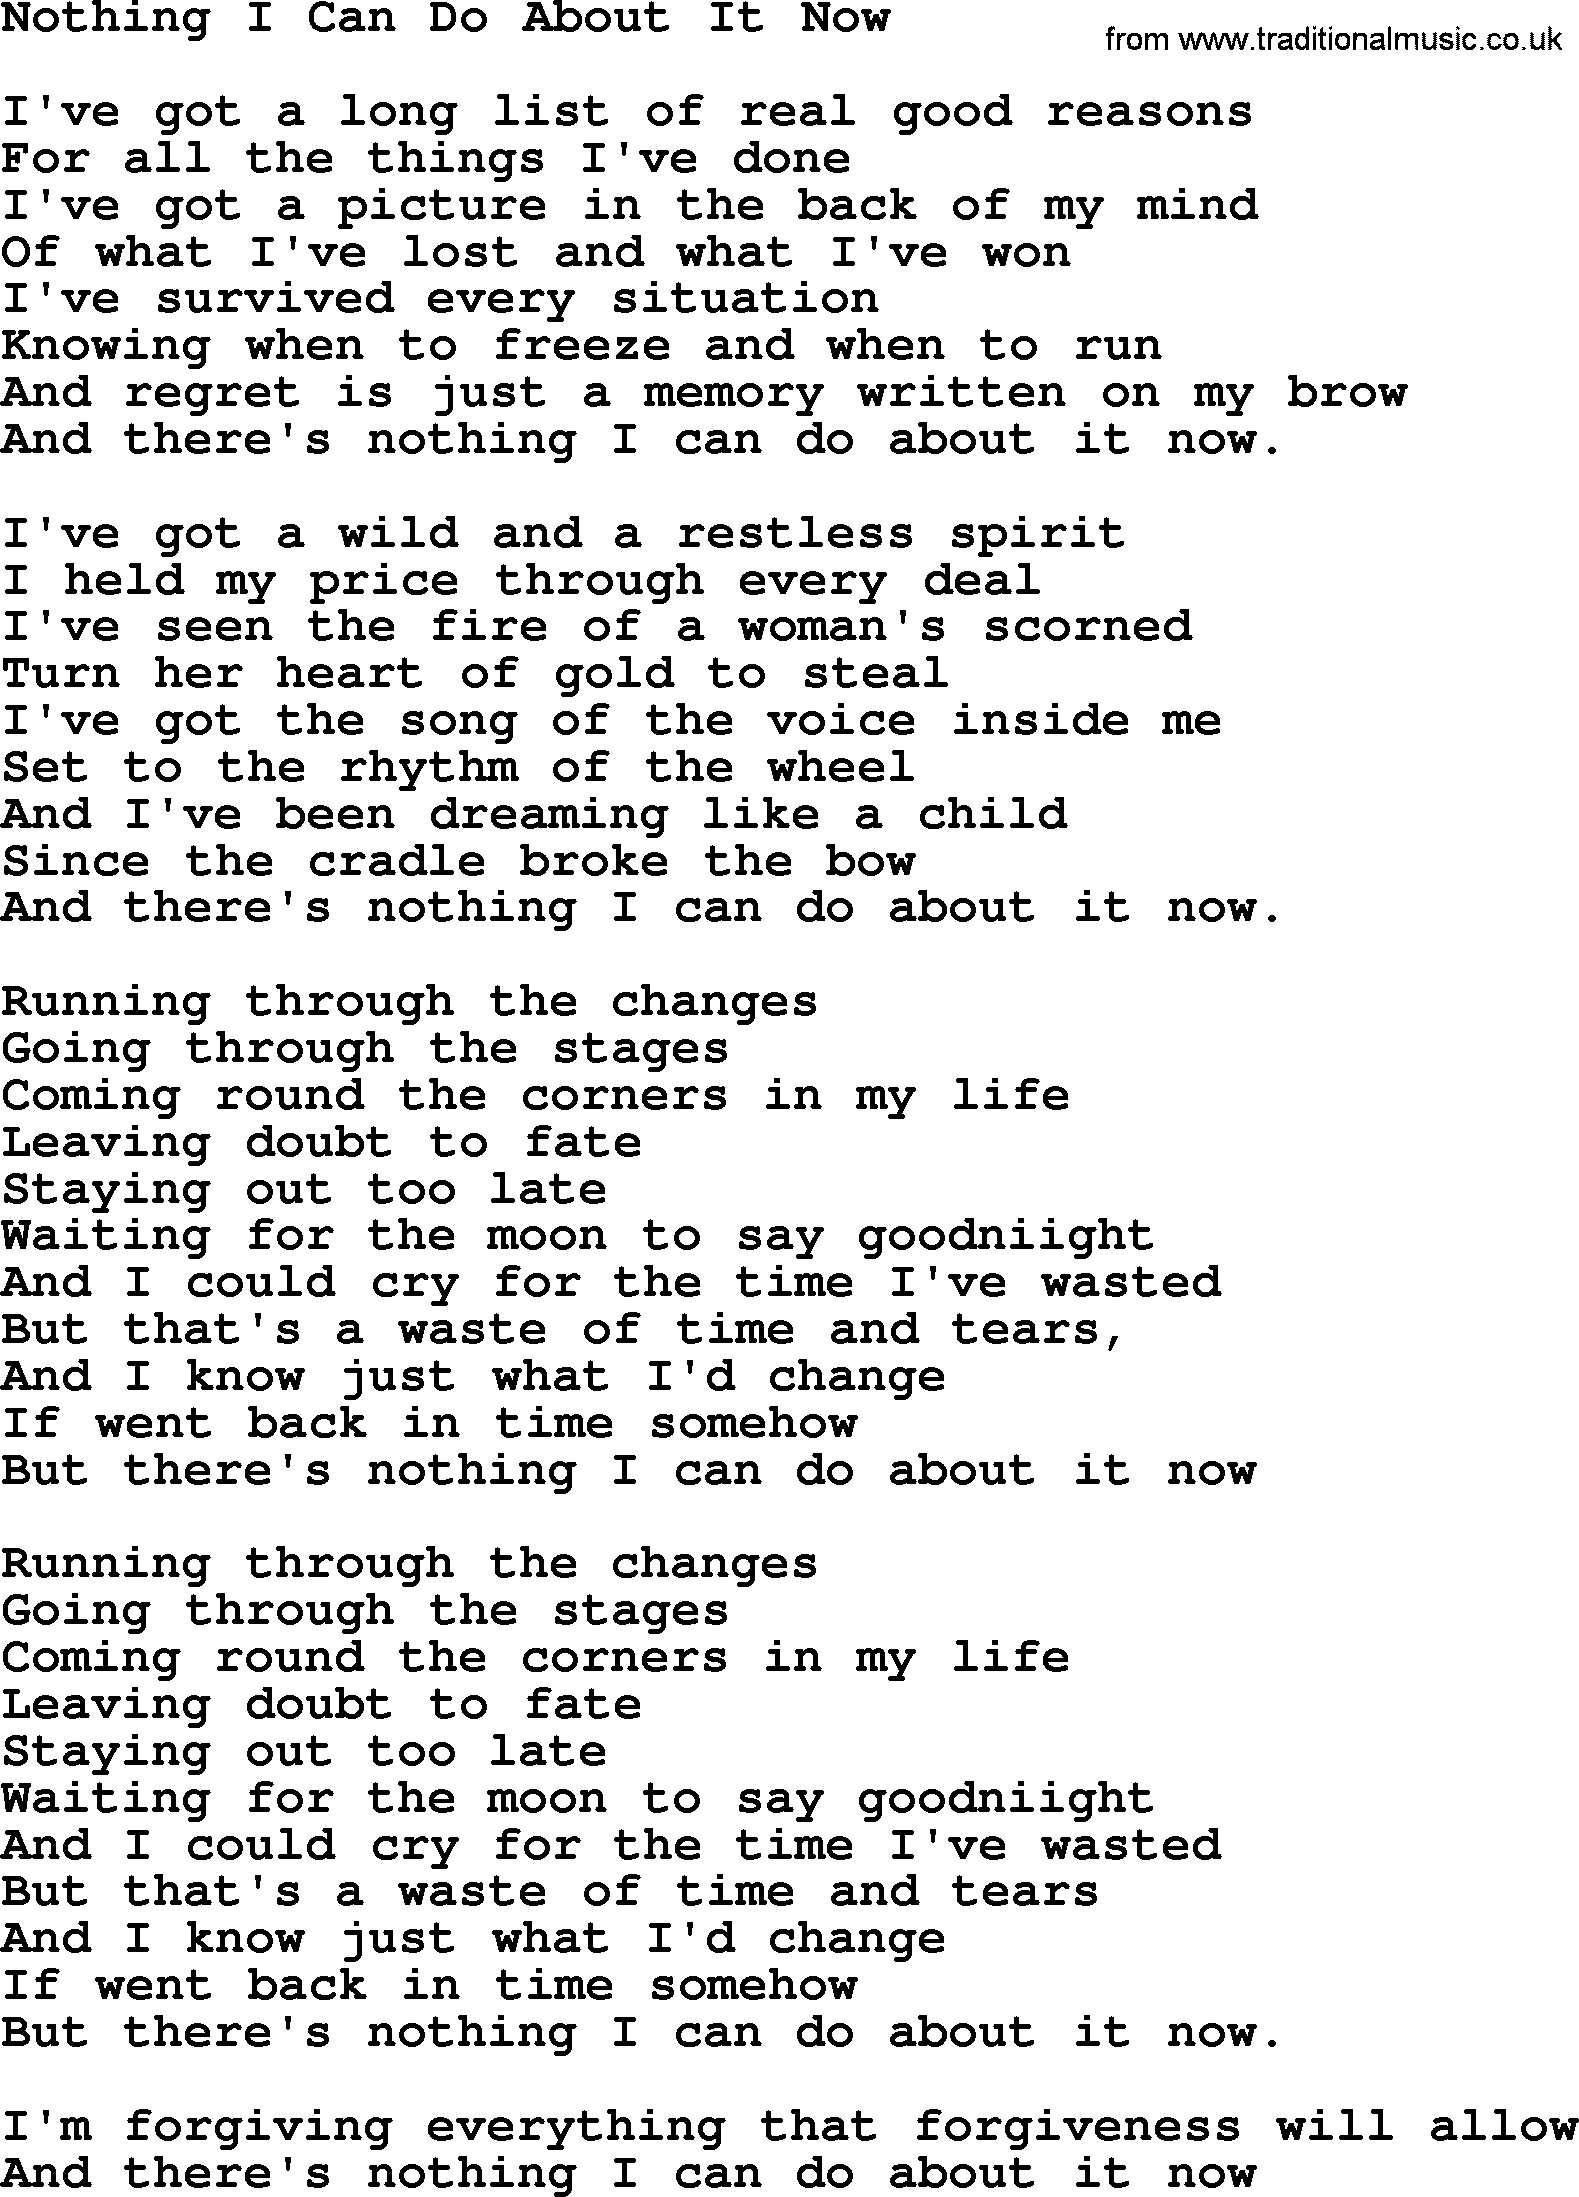 Willie Nelson song: Nothing I Can Do About It Now lyrics